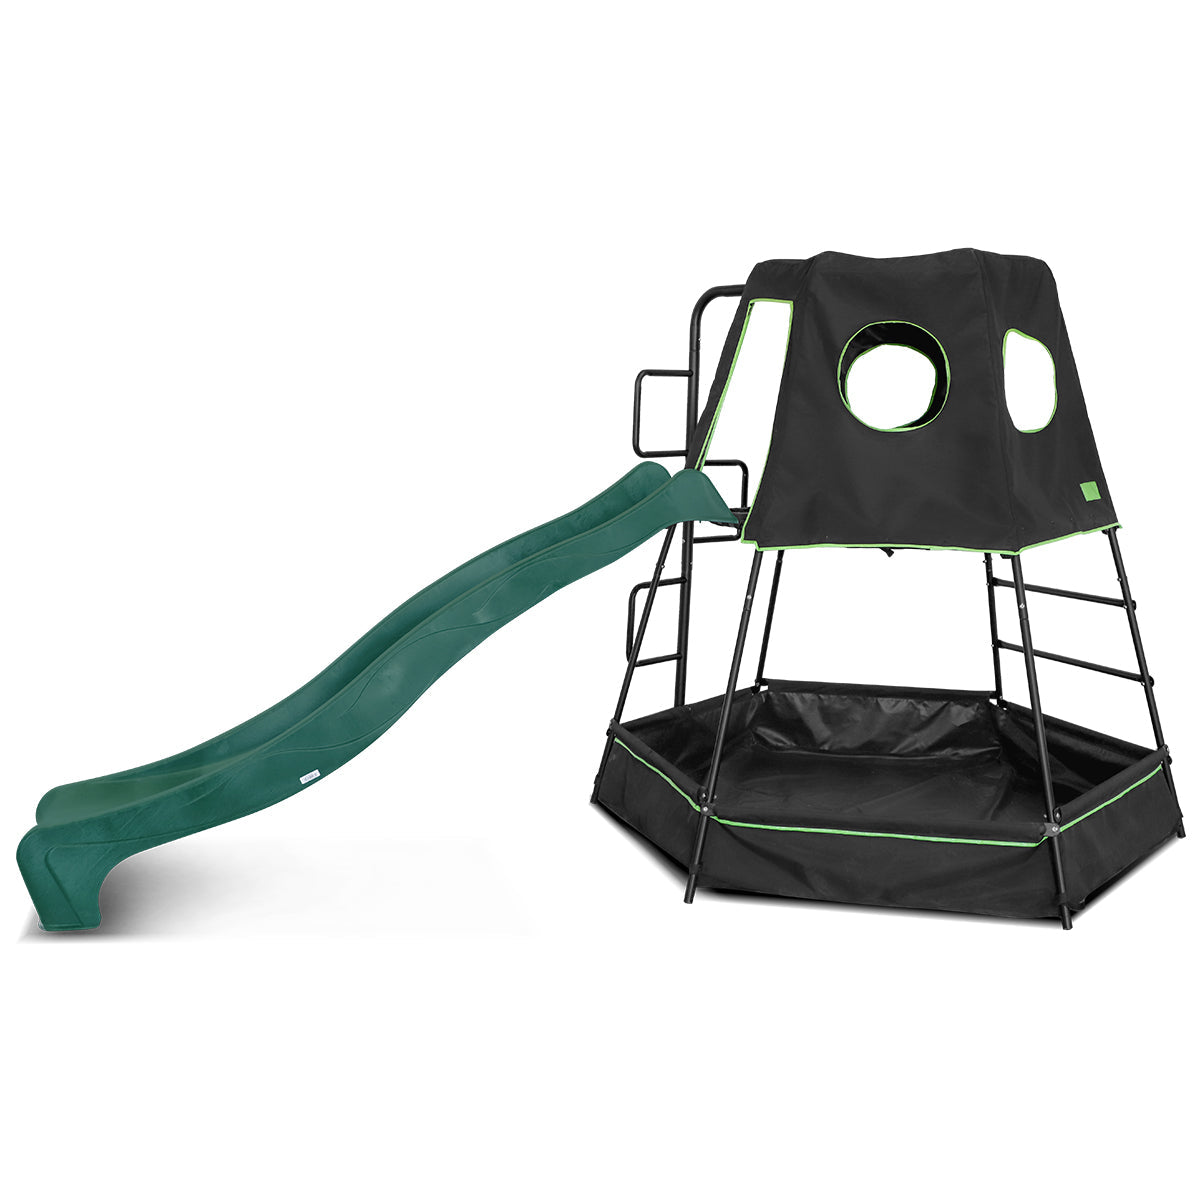 Lifespan Kids Pallas Play Tower (Green Slide)-Baby &amp; Kids &gt; Toys-PEROZ Accessories